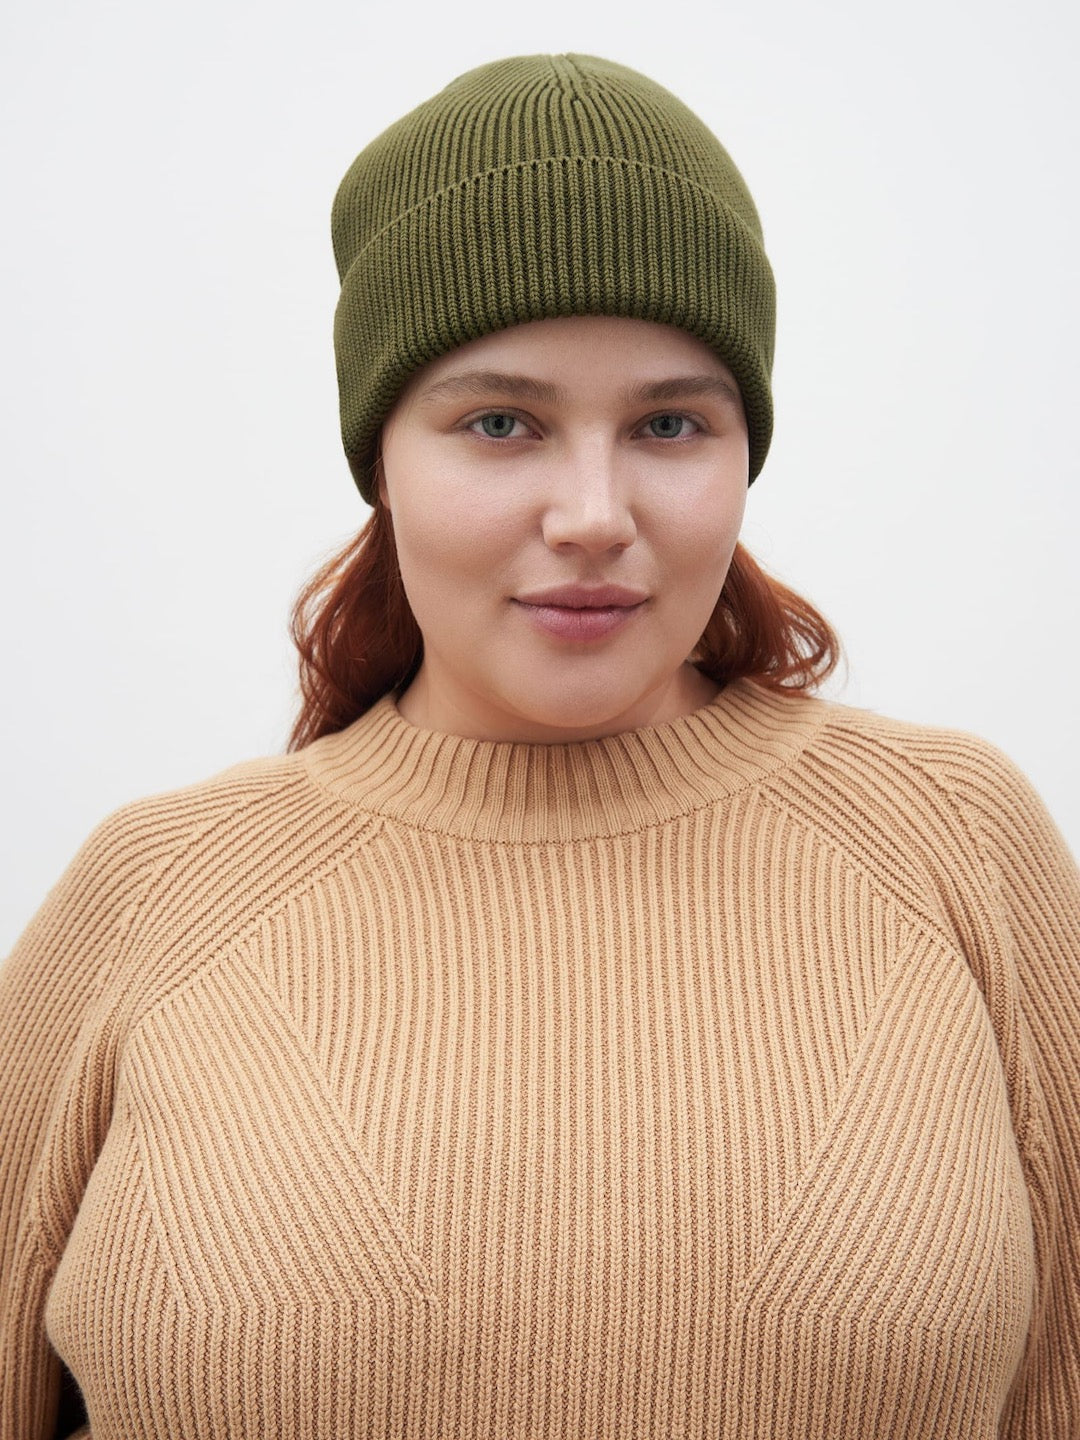 A woman wearing a tan sweater and Kowtow Moss beanie.